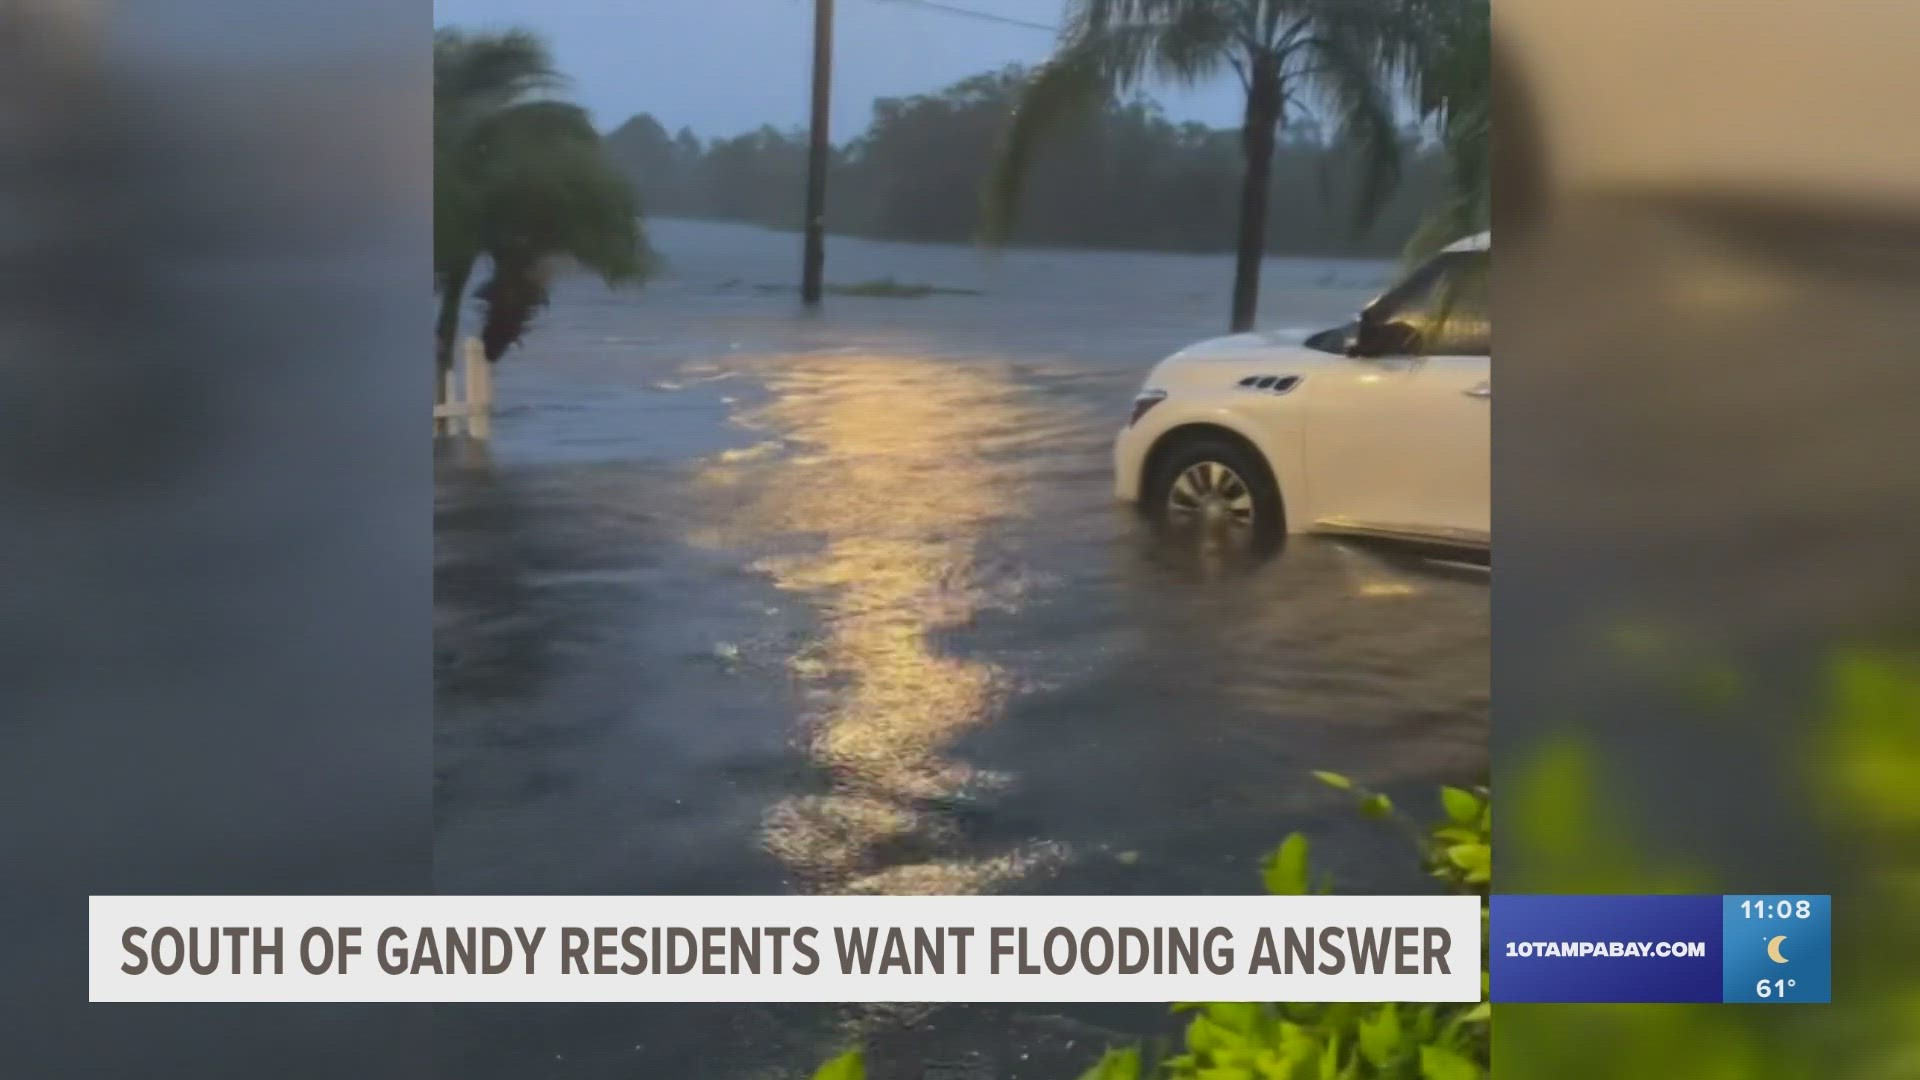 Residents south of Gandy Boulevard say they have long been neglected by the city in favor of developers that have made flooding worse.